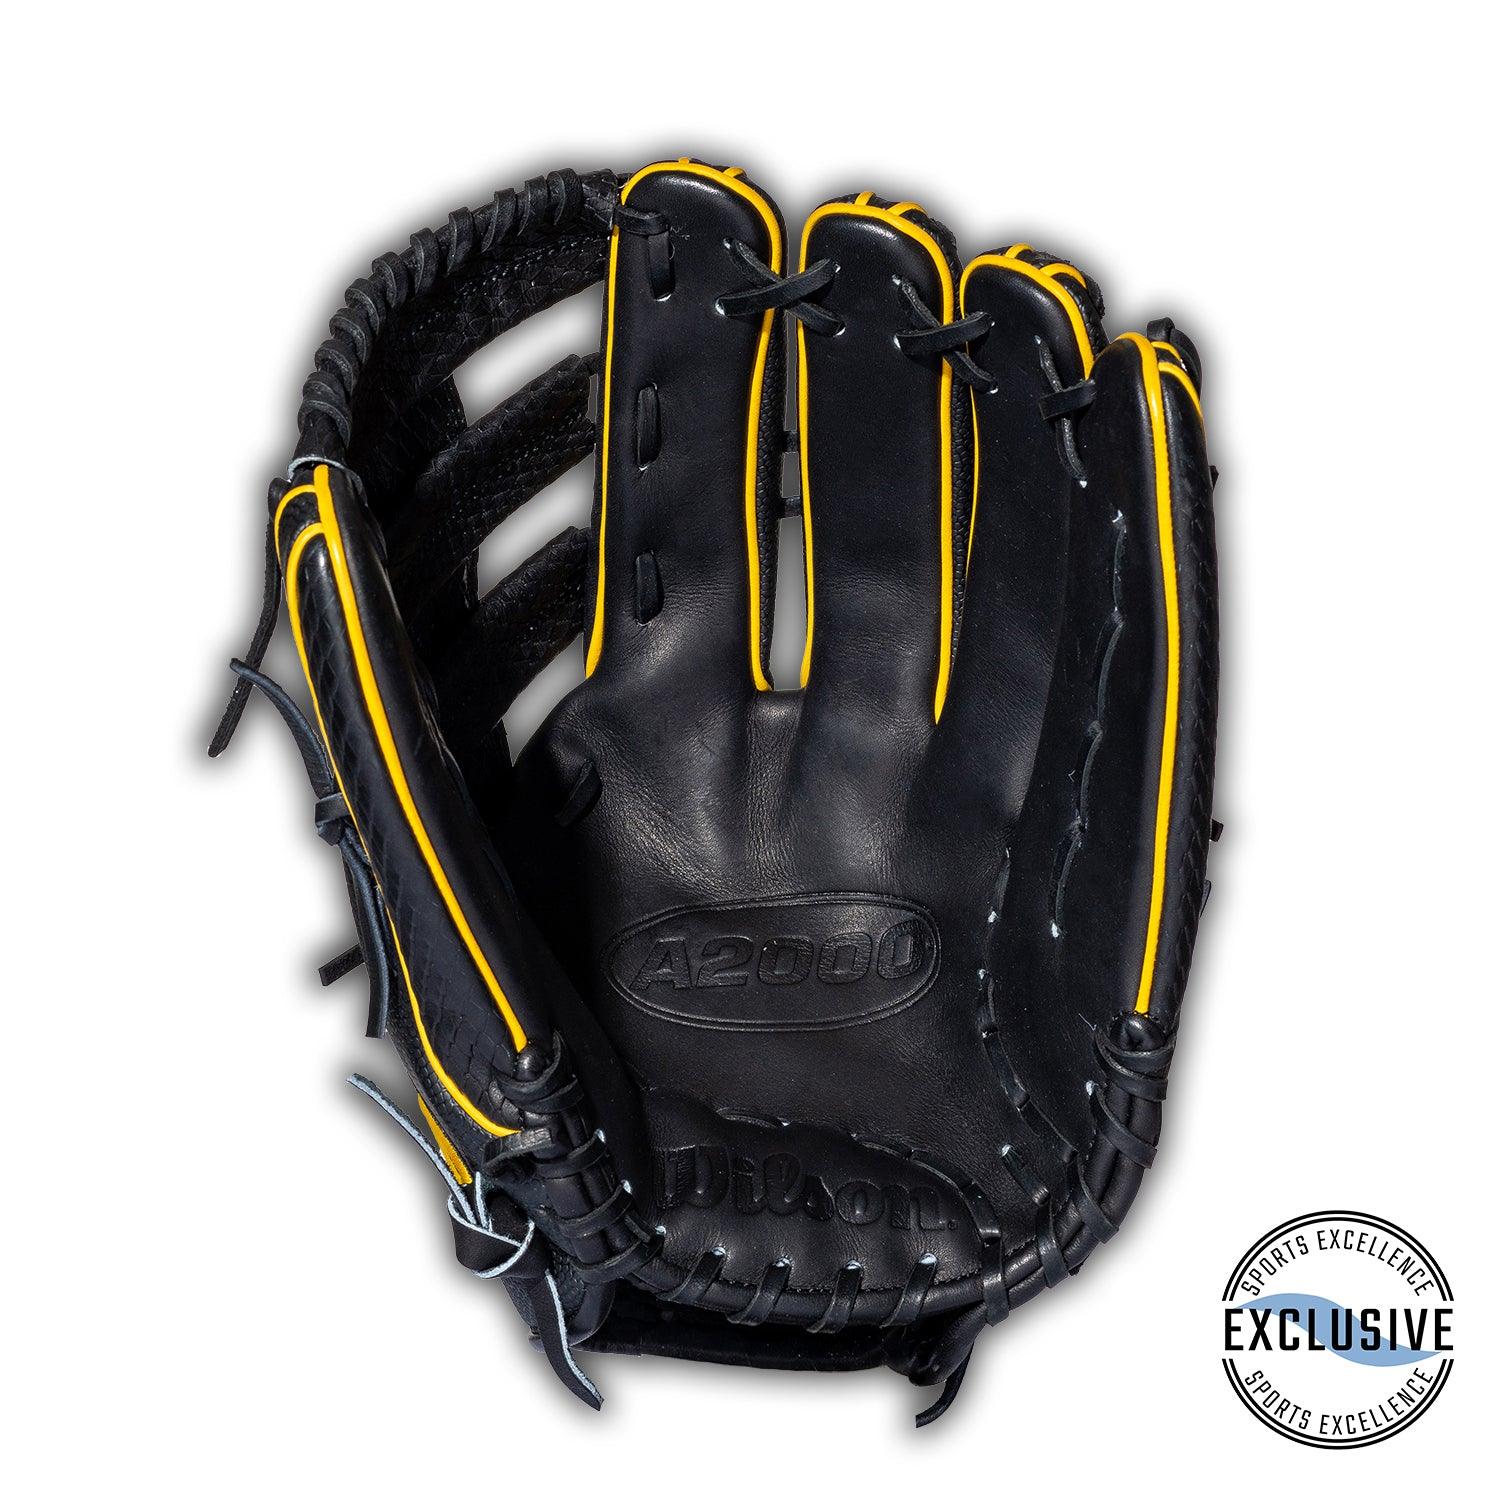 A2000 Slow Pitch 13" Superskin Glove - Sports Excellence